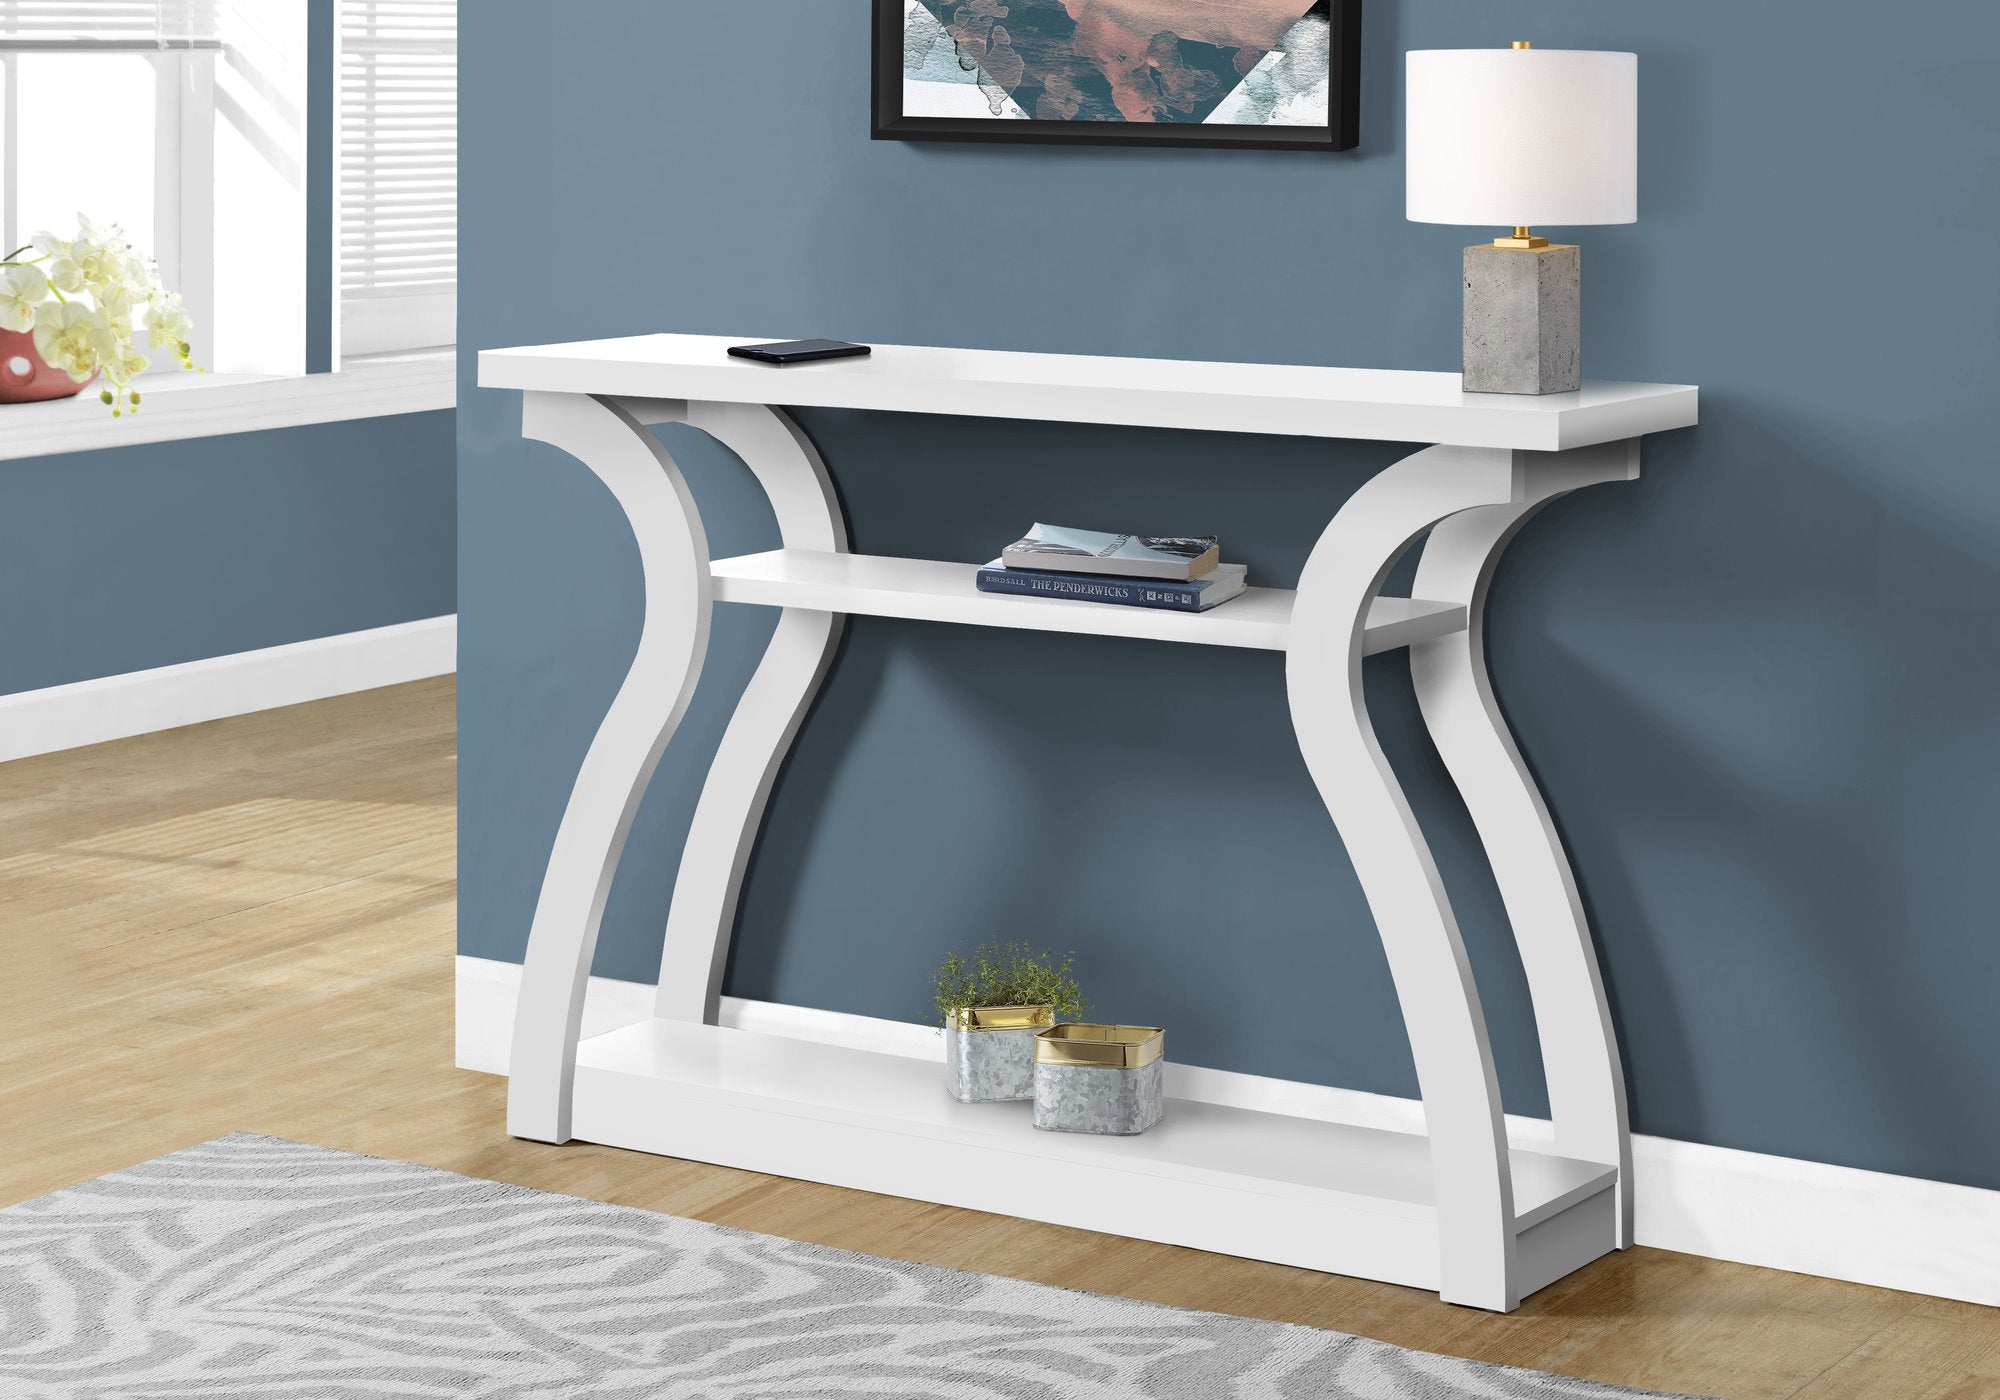 MN-202438    Accent Table, Console, Entryway, Narrow, Sofa, Living Room, Bedroom, Laminate, White, White, Contemporary, Modern